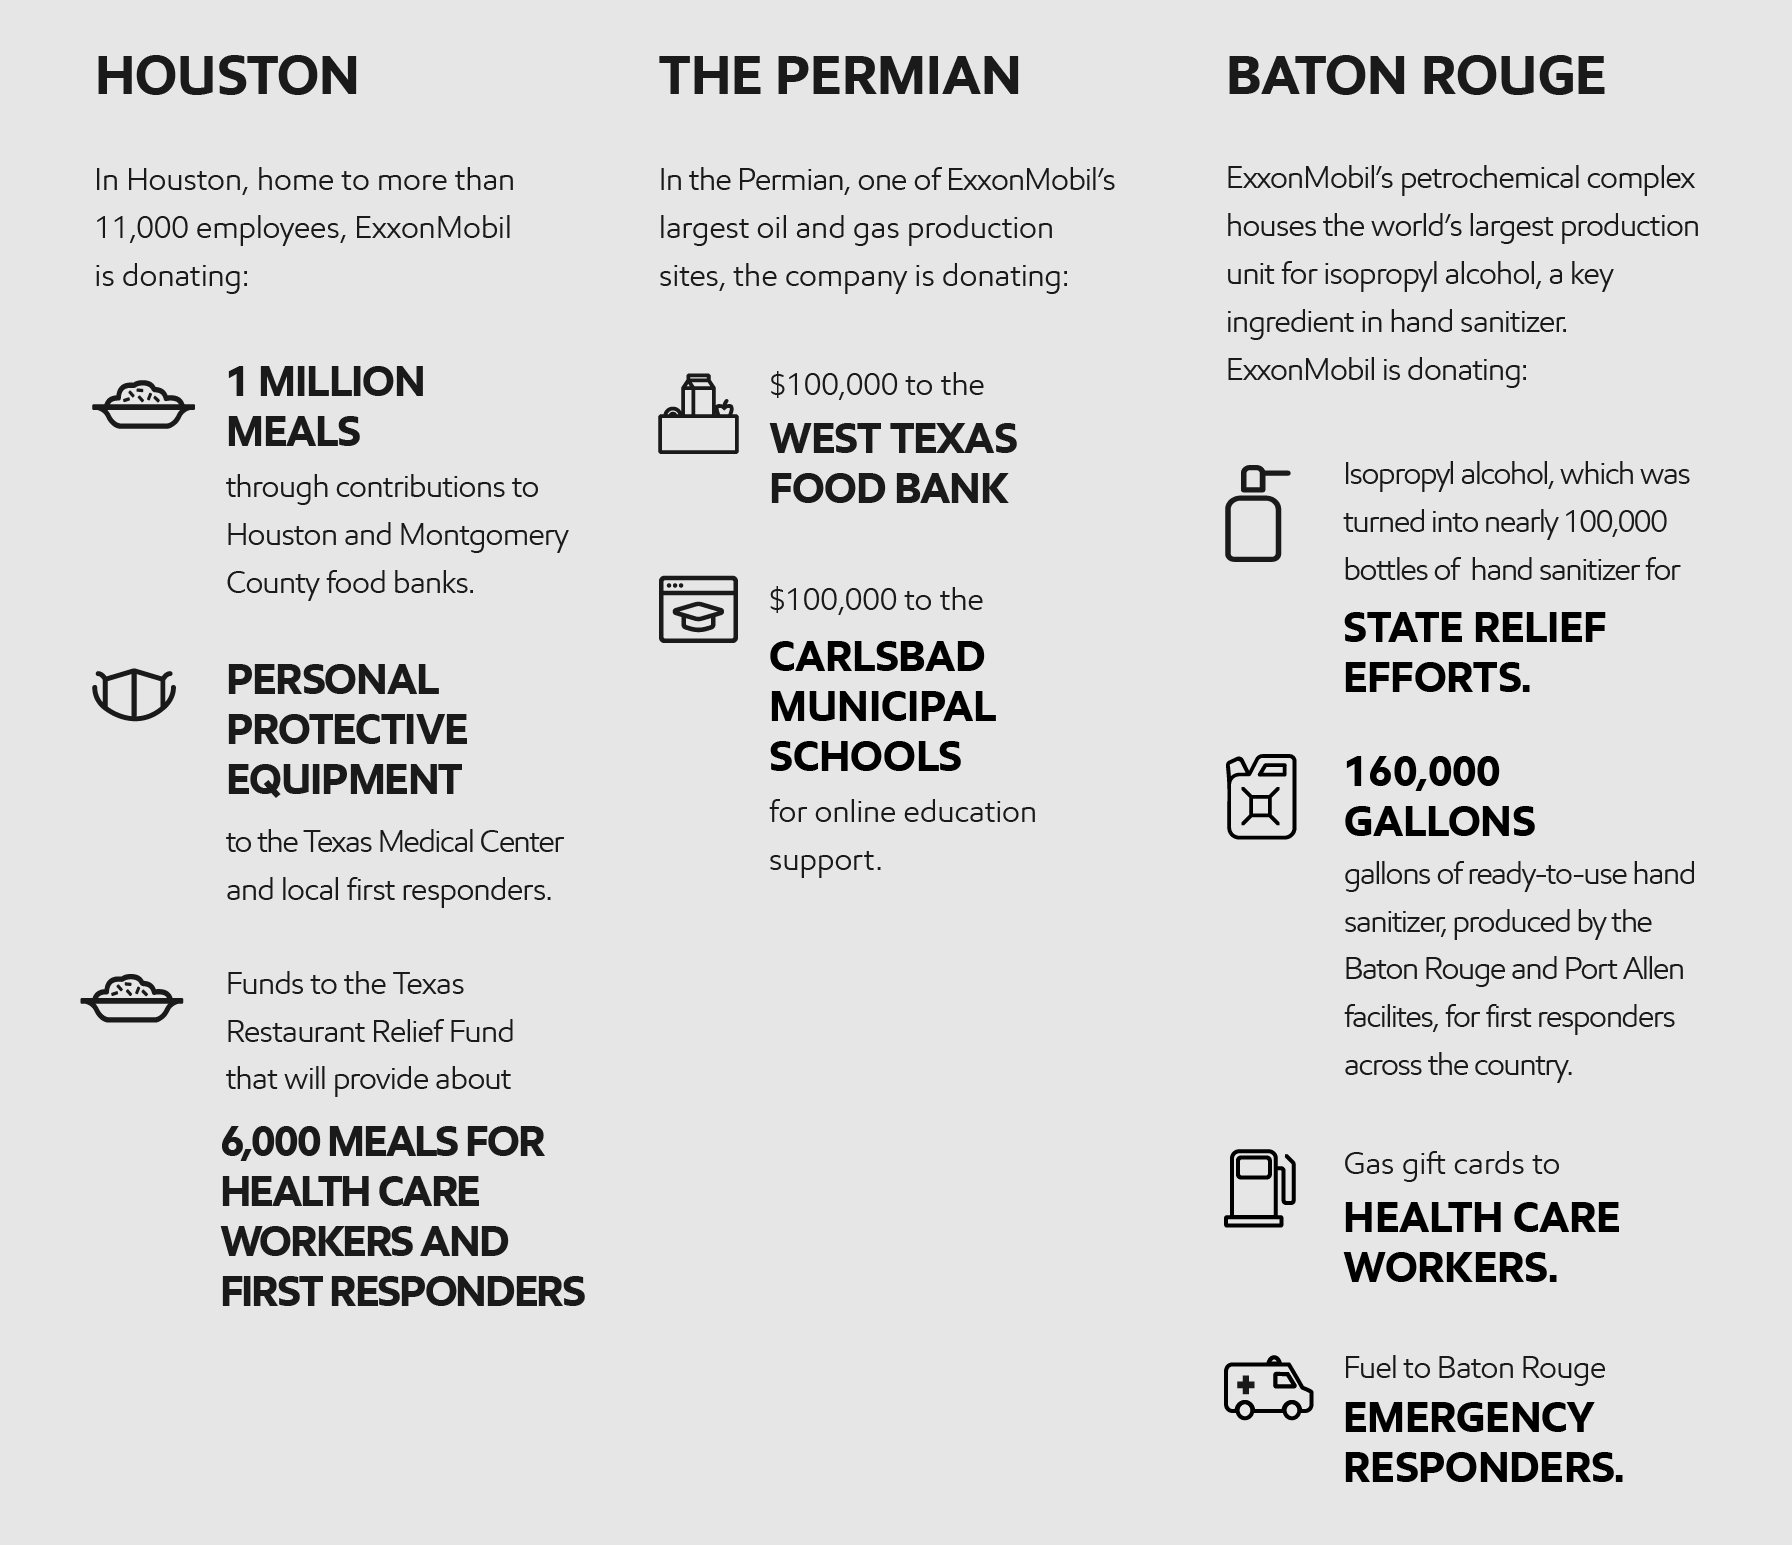 Our Gulf Coast Response Infographic